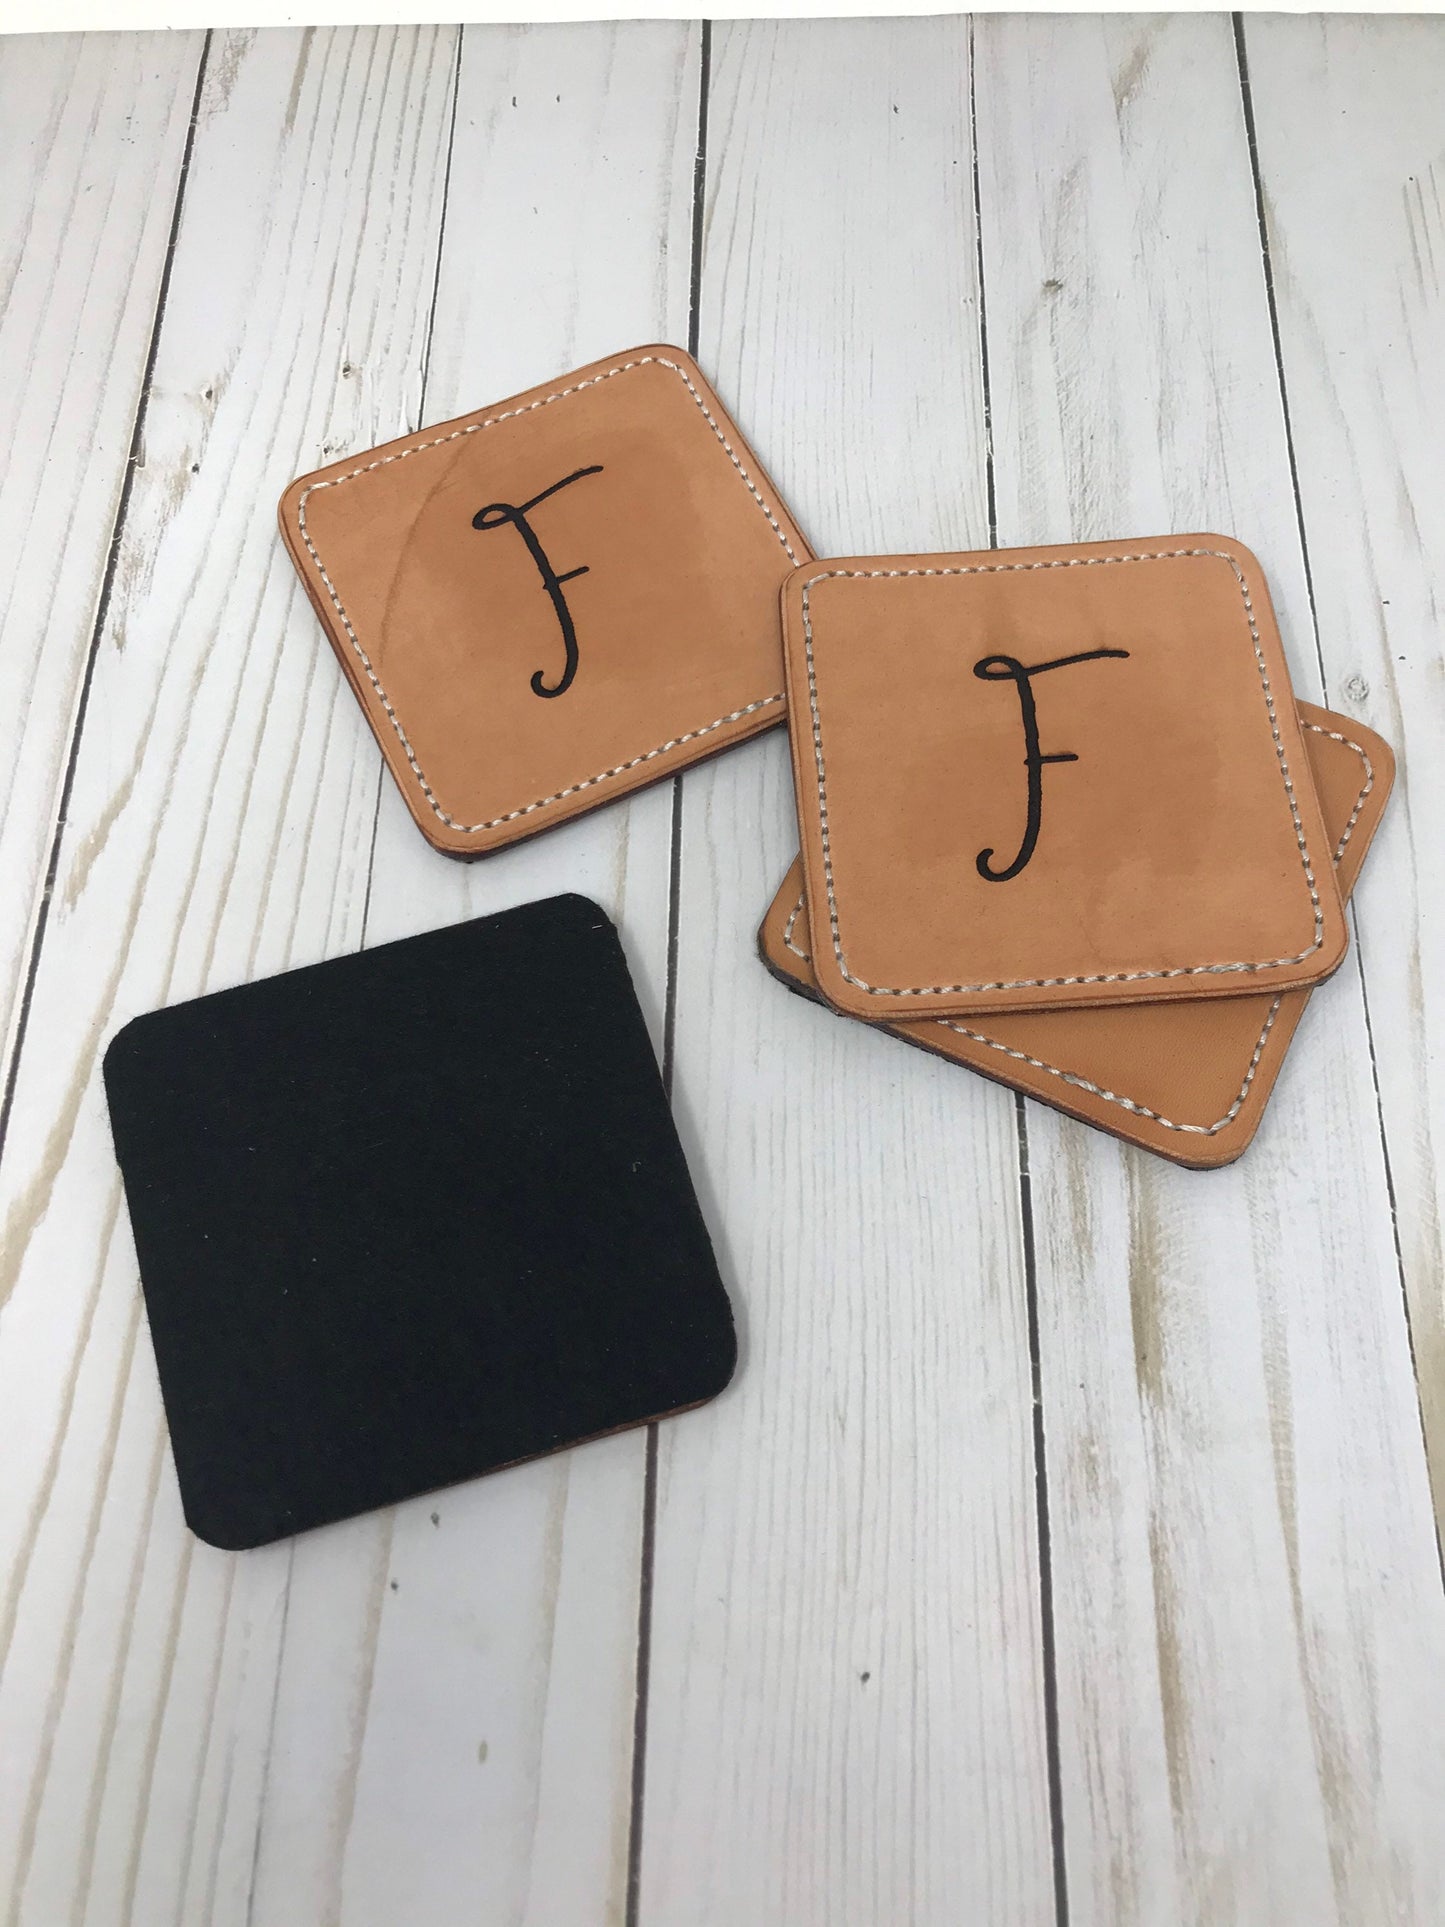 Coasters, Monogrammed Leather Coasters| 4 Pack |Stitched Coasters | Logo Engraved